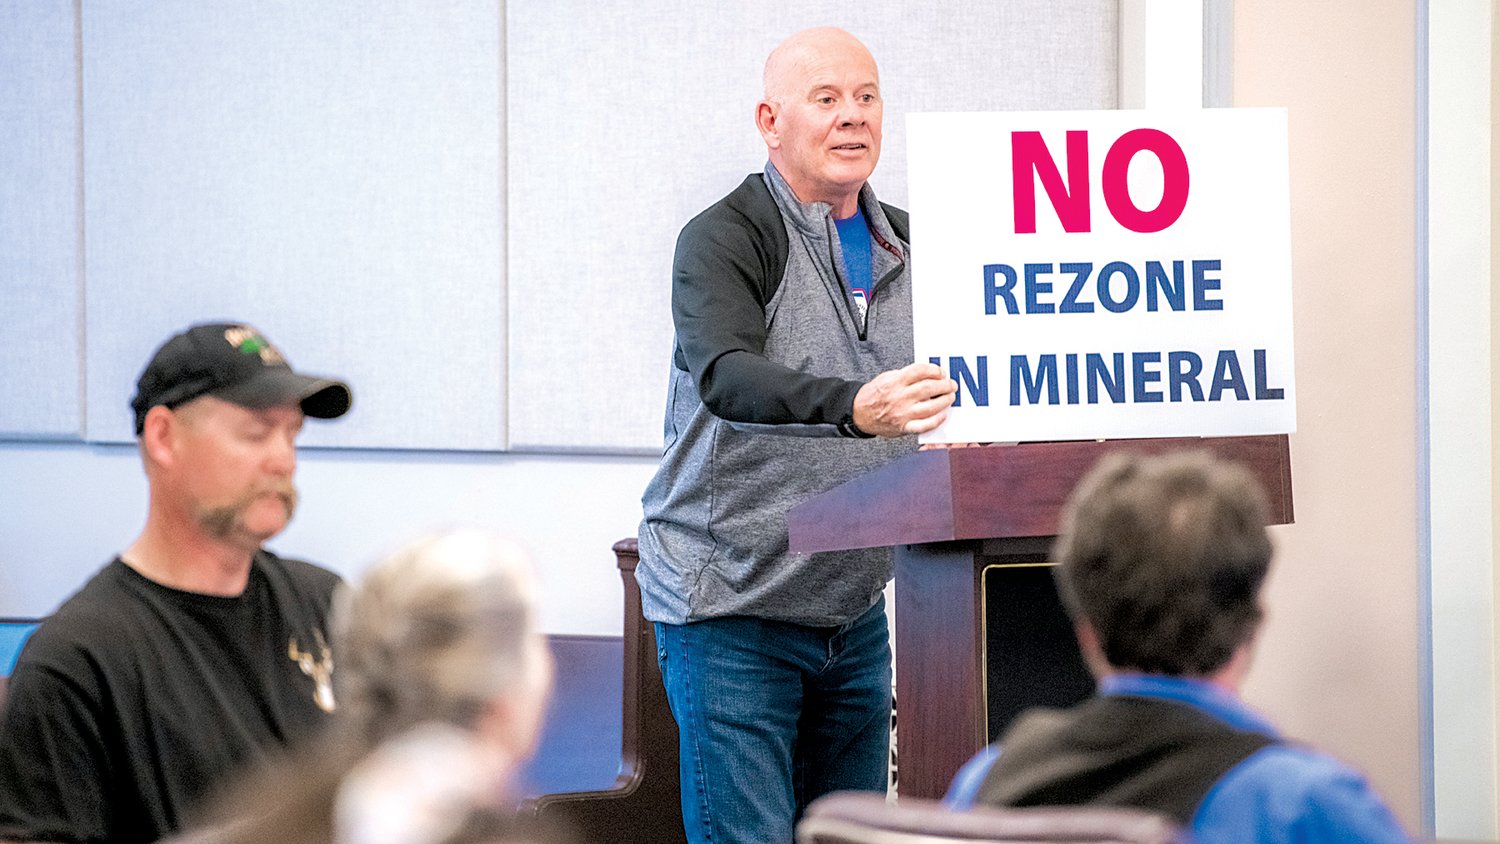 Mike Heinz holds a sign during a public hearing held by the Lewis County Planning Commission at the Lewis County Courthouse in Chehalis on Tuesday evening on a rezone proposal north of Mineral Lake.